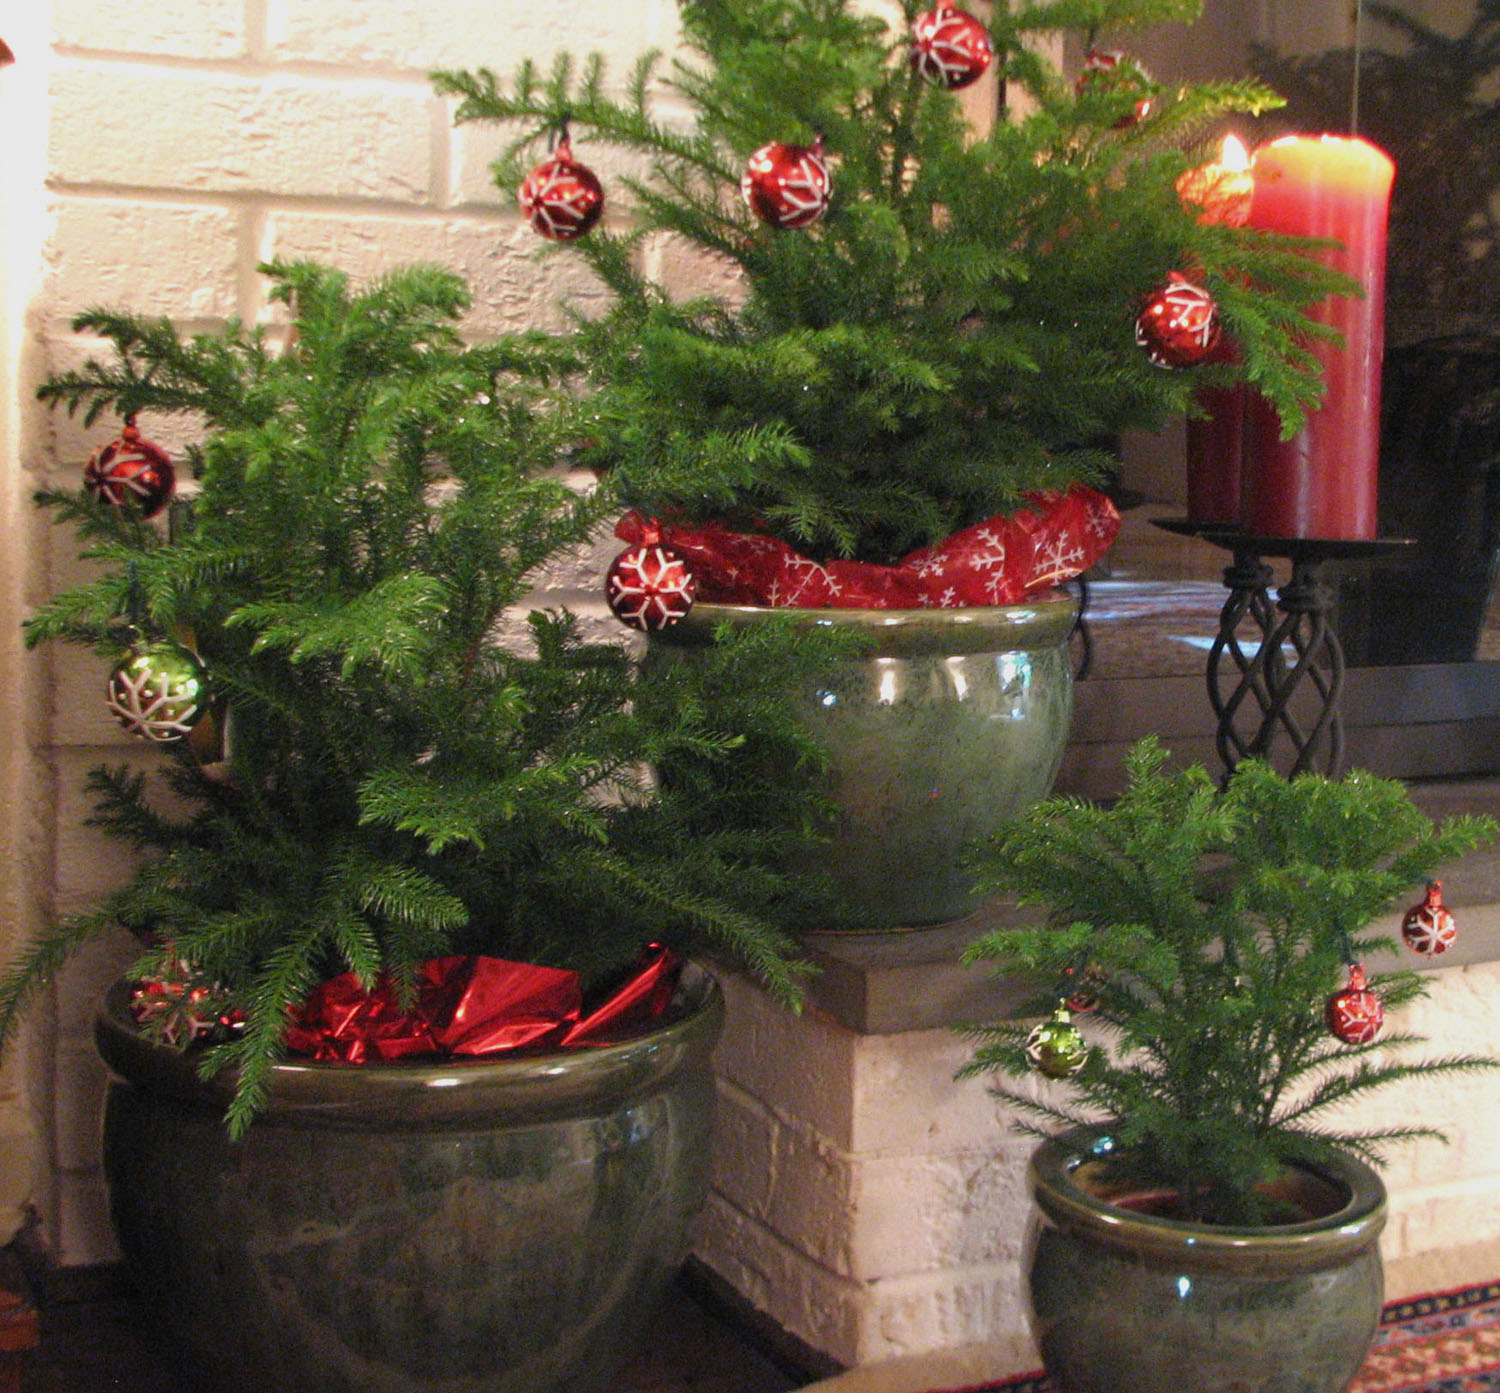 Perfect for teachers, college students or apartment dwellers, Costa Farms’ Norfolk Island Pine is the living green gift that is both inexpensive and eco-chic.